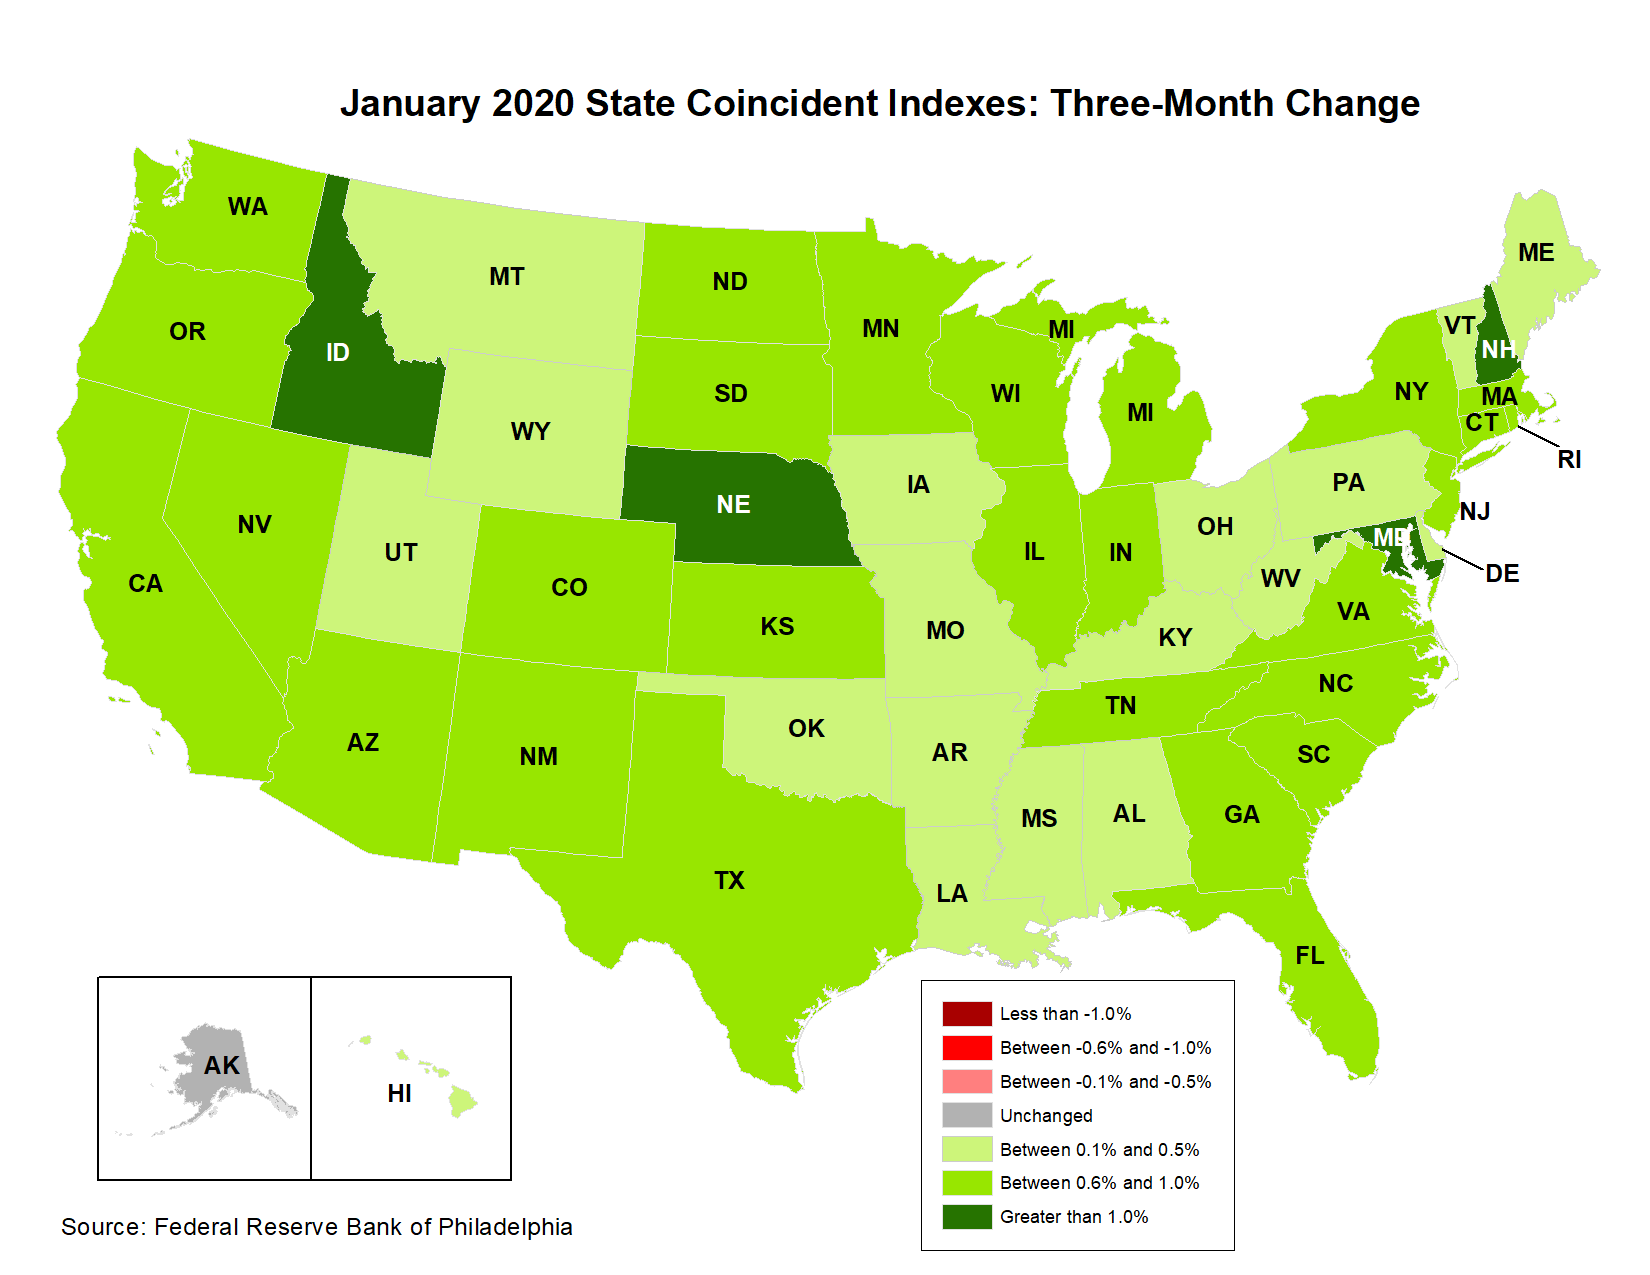 Map of the U.S. showing the State Coincident Indexes Three-Month Change in January 2020